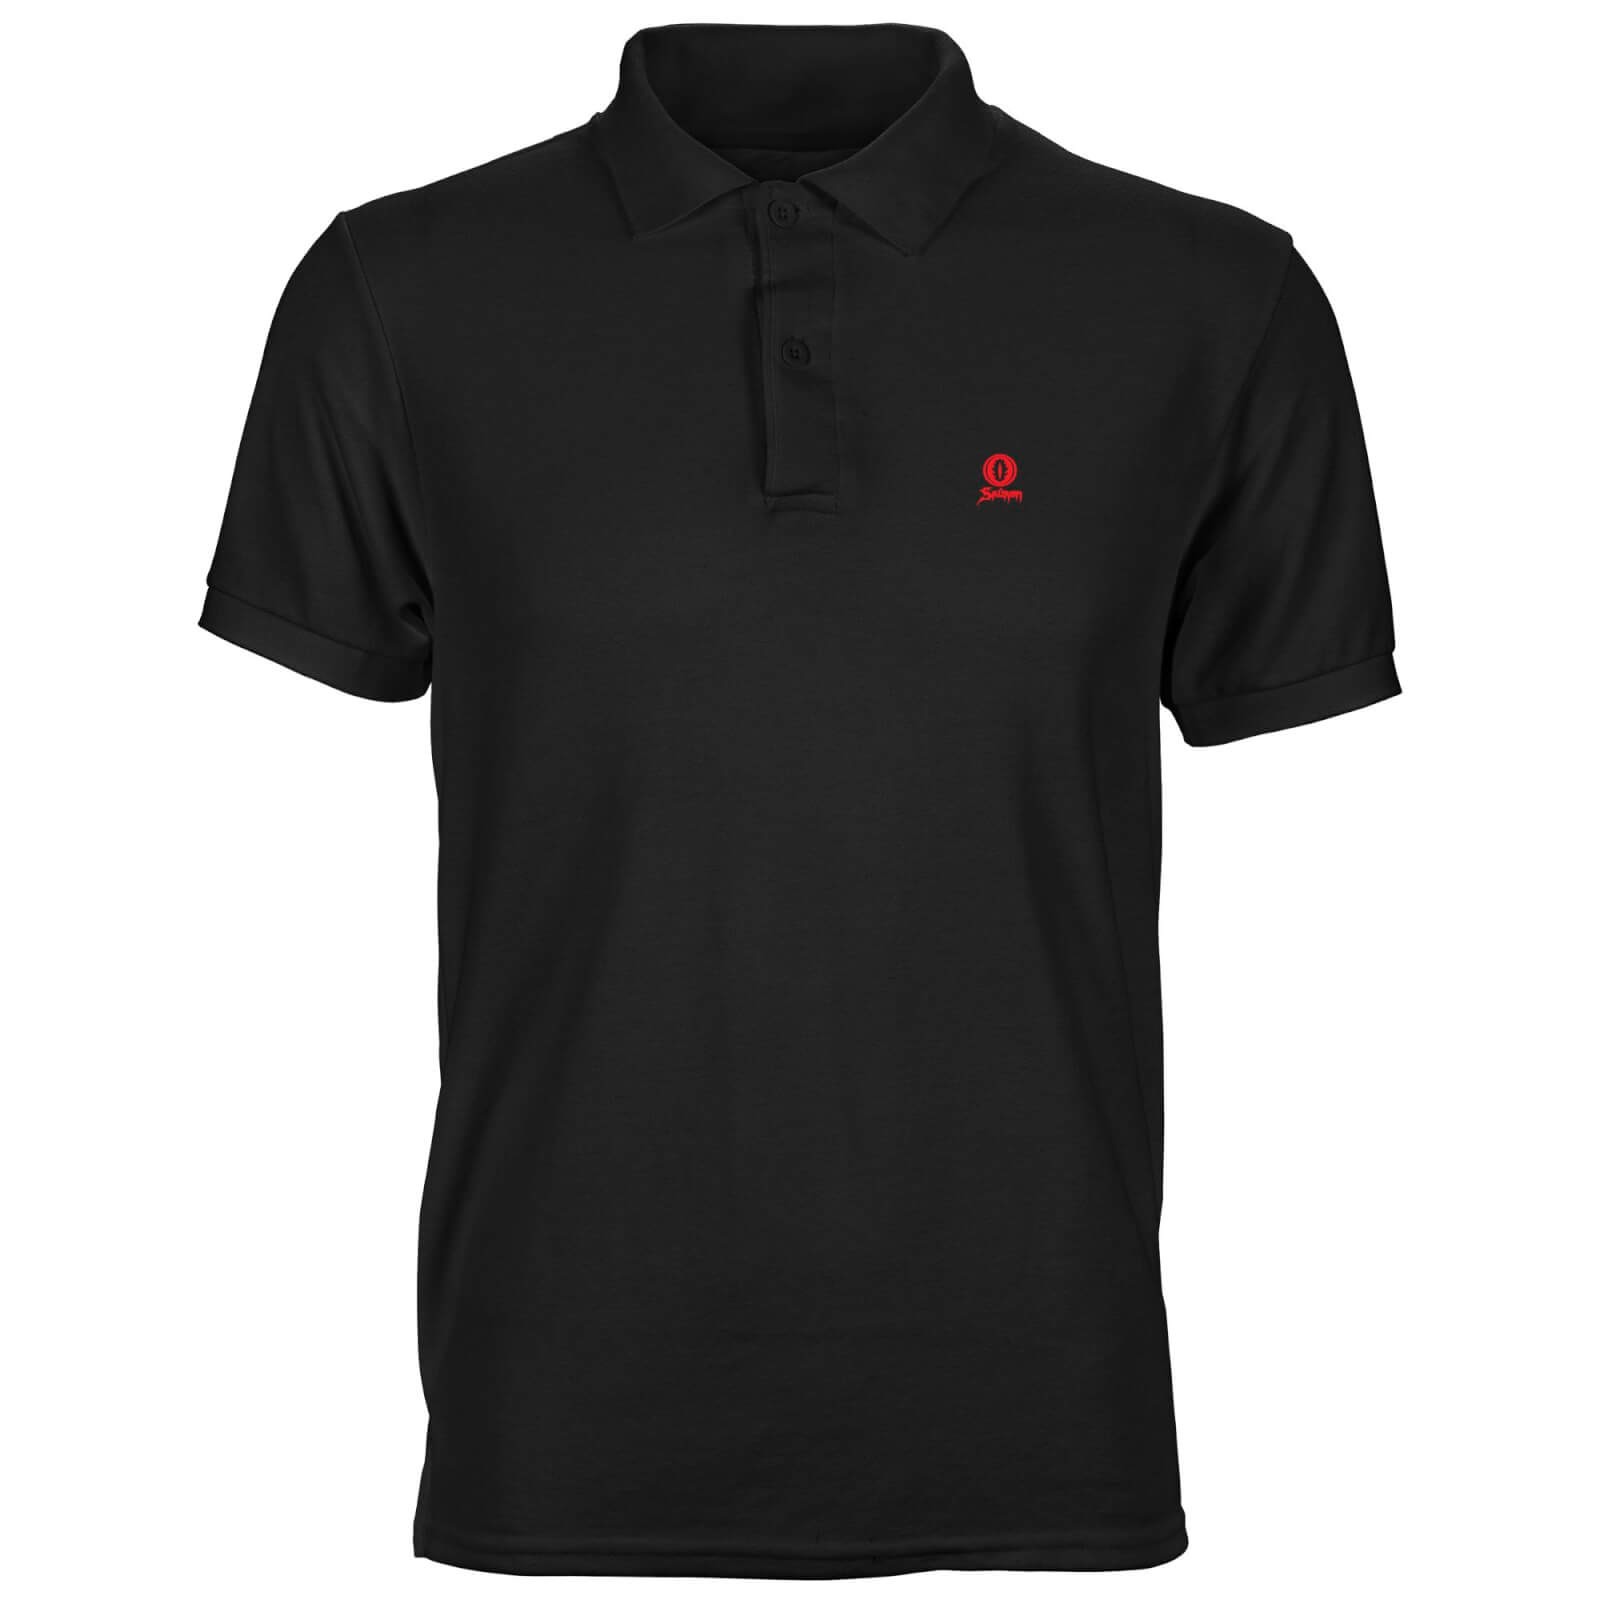 Lord Of The Rings Sauron Unisex Polo - Black - S - Noir